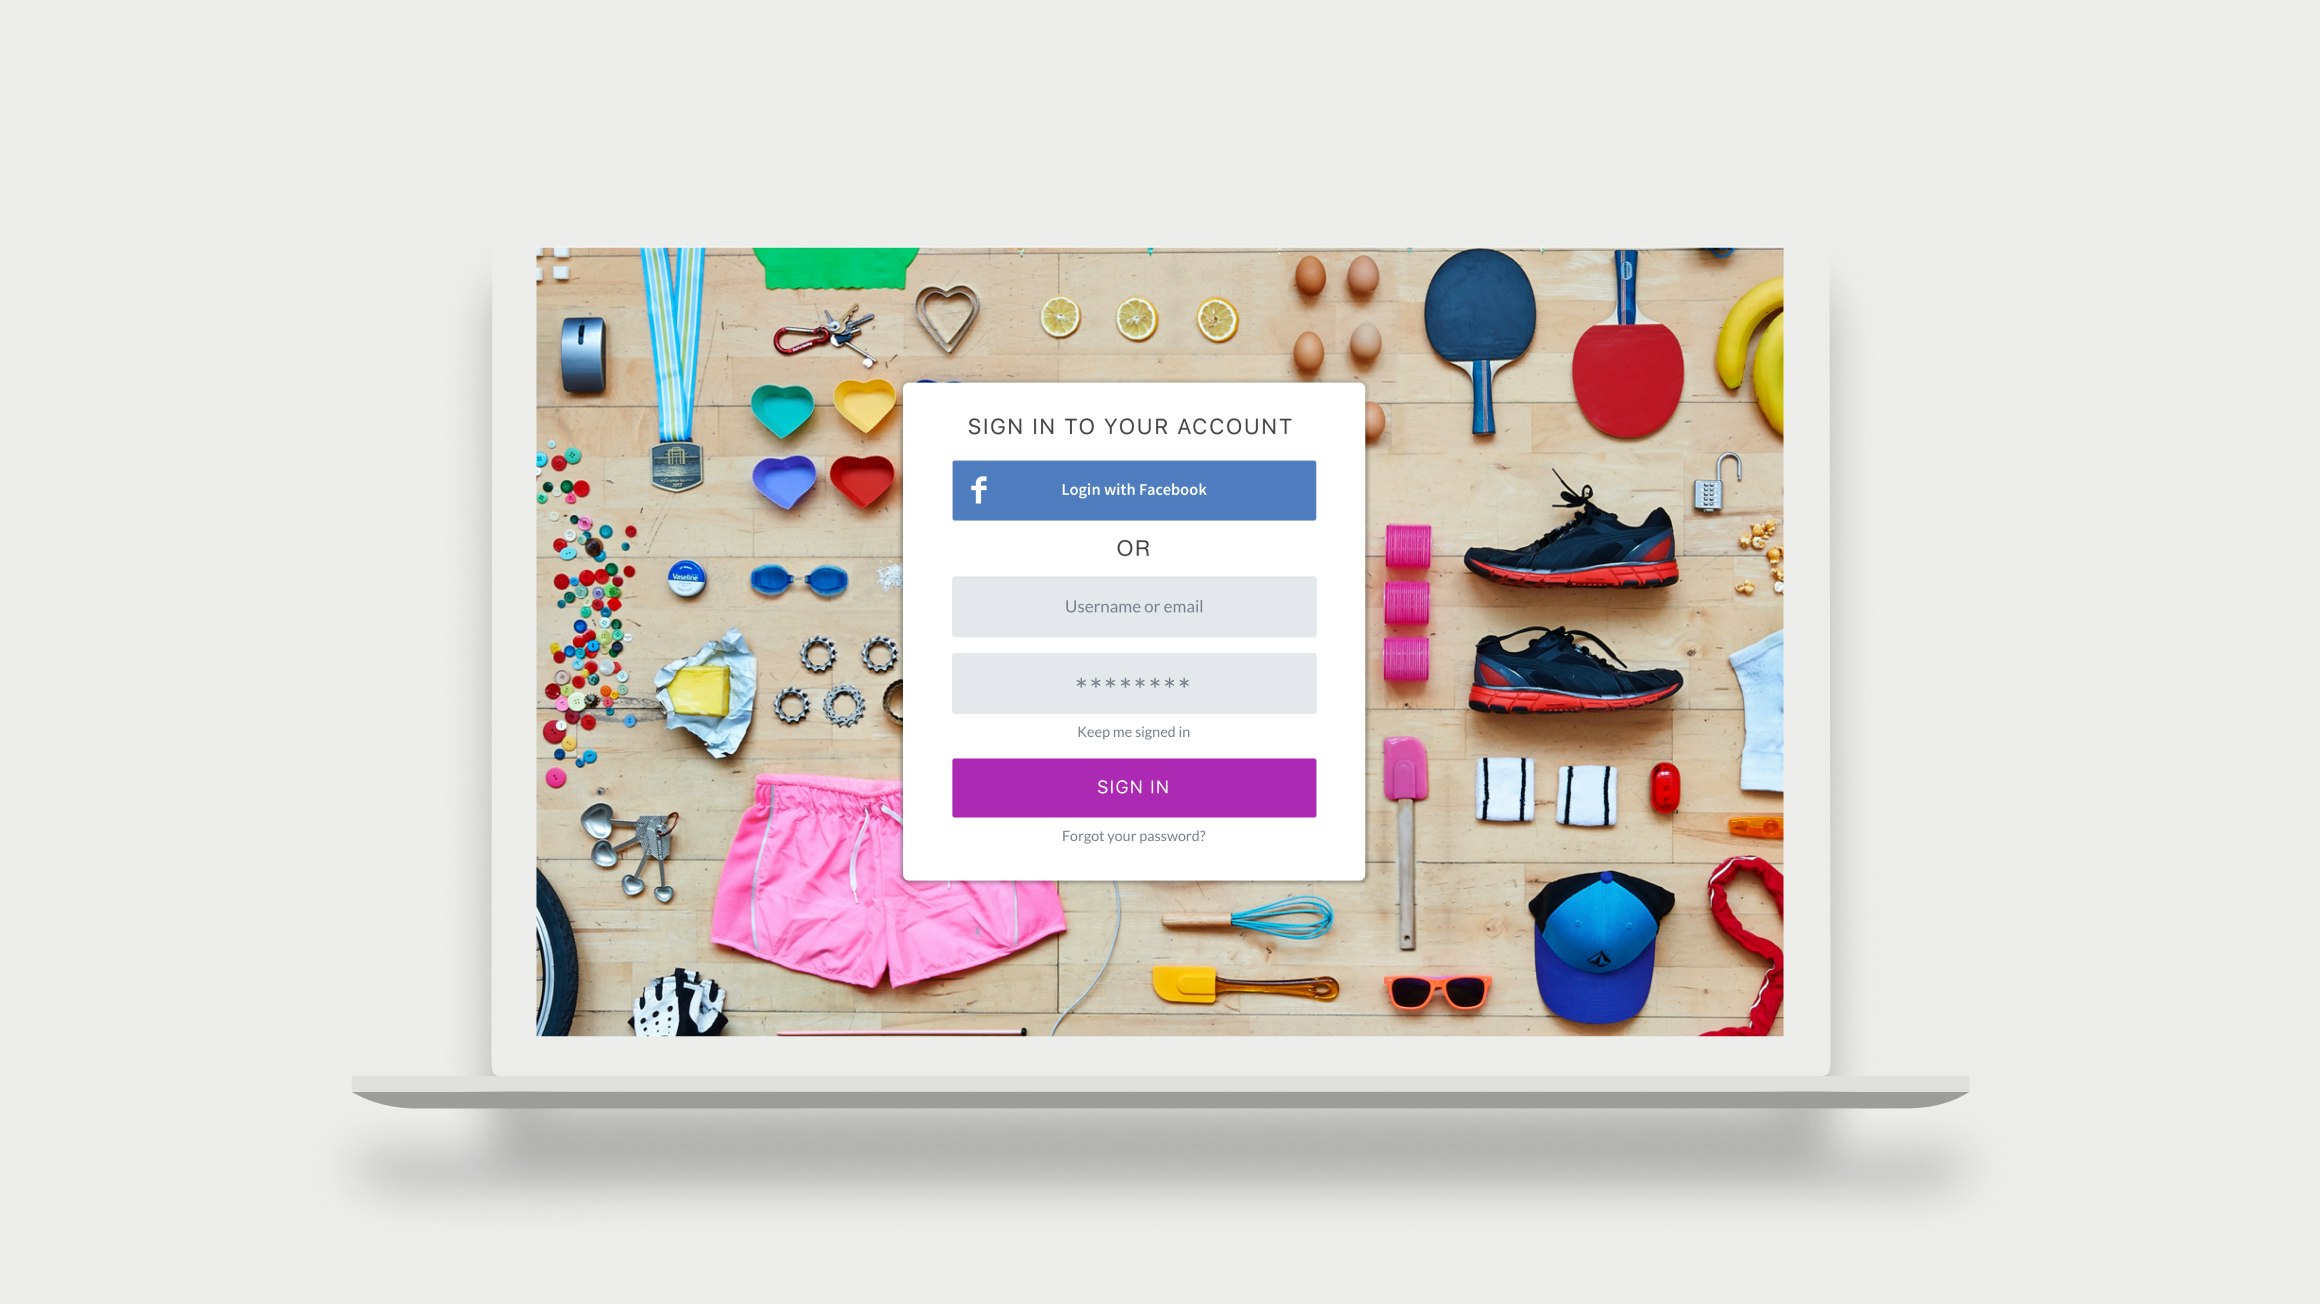 The fun of fundraising — Creative direction for Just Giving for key pages in onboarding flow